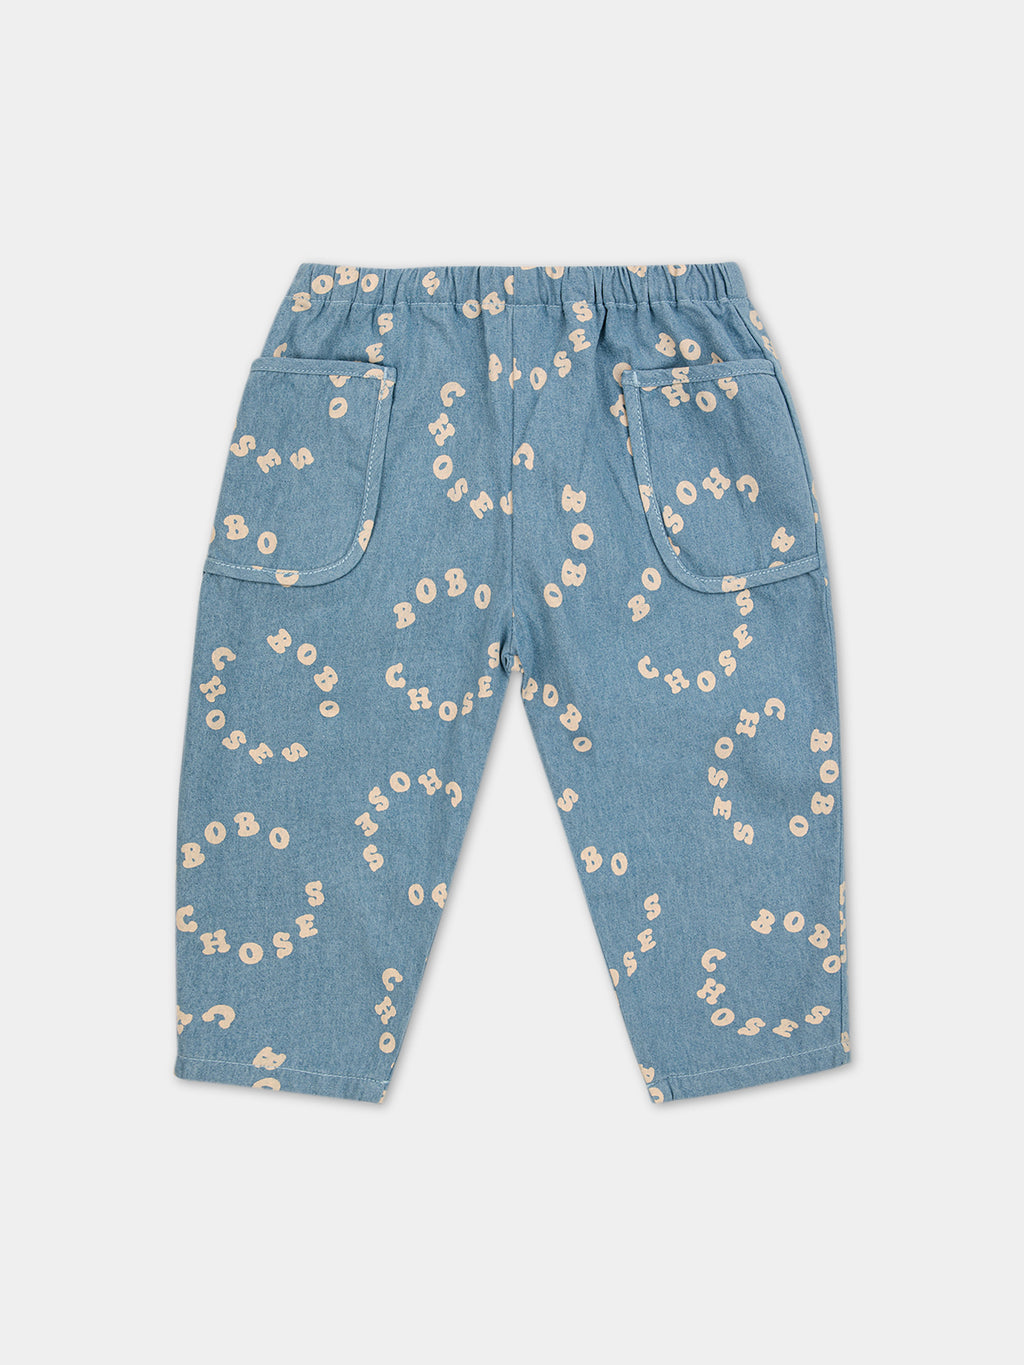 Denim jeans for babies with all-over circle logo